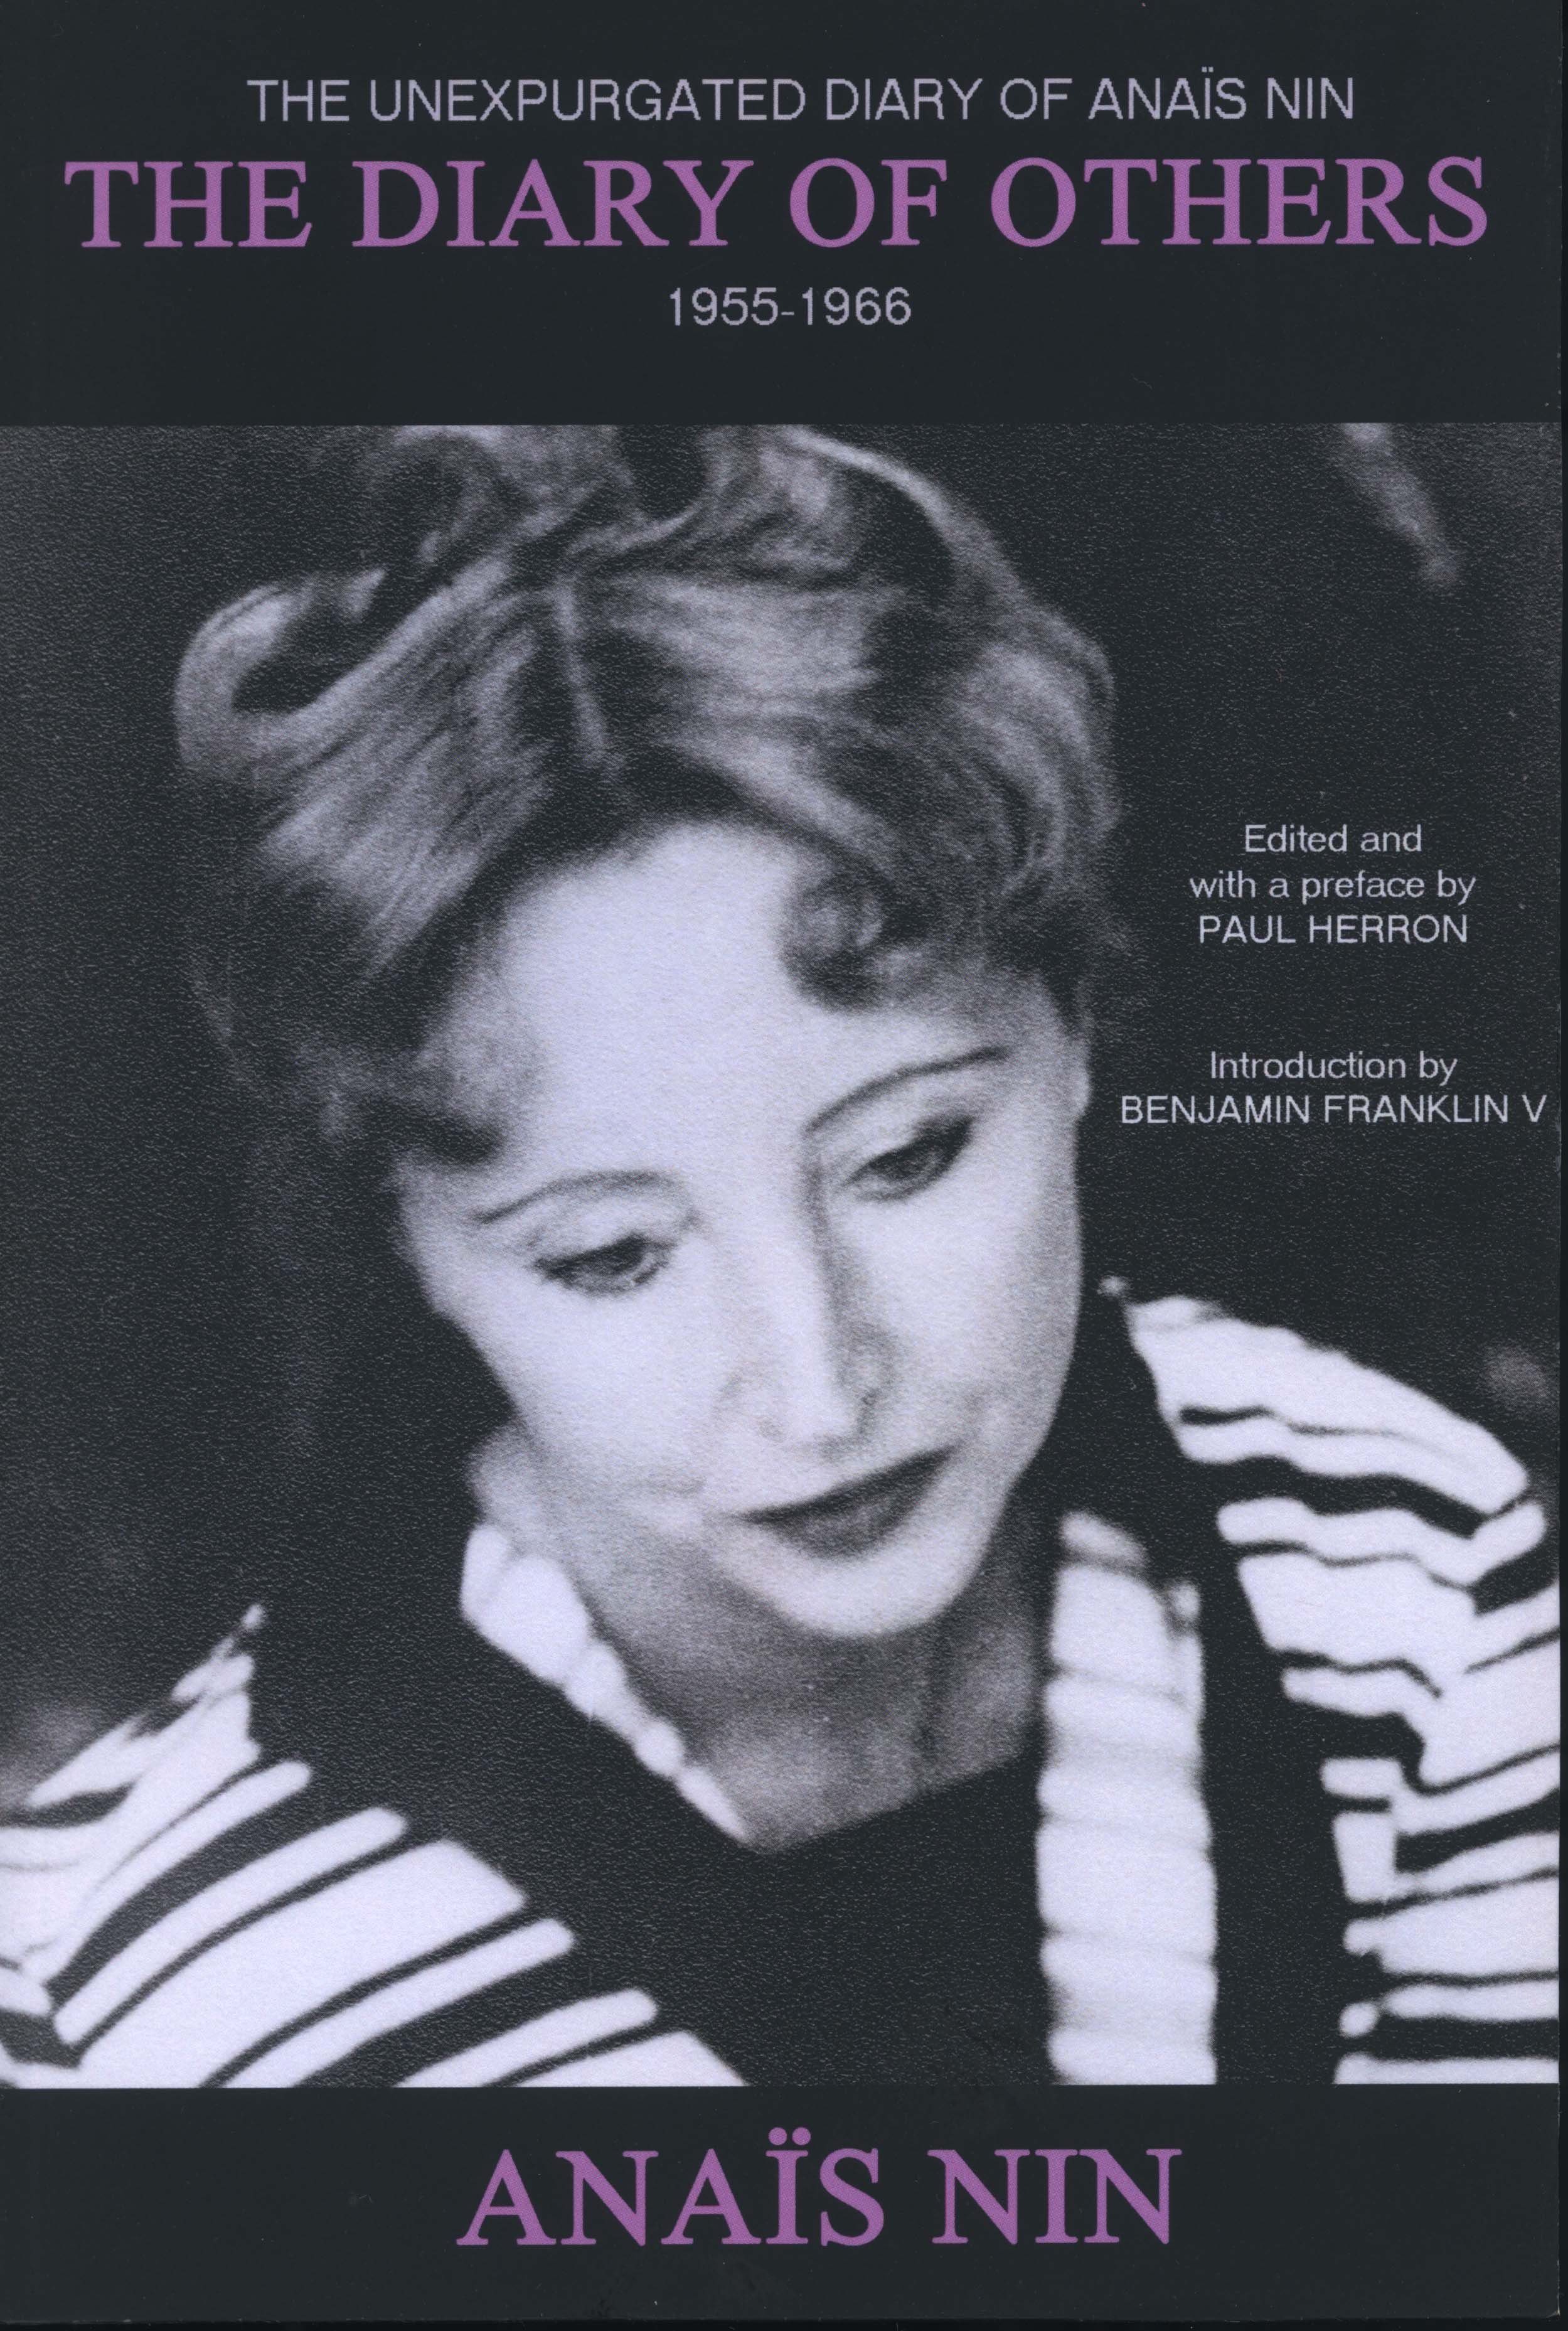 The Diary of Others: The Unexpurgated Diary of Anais Nin, 1955-1966